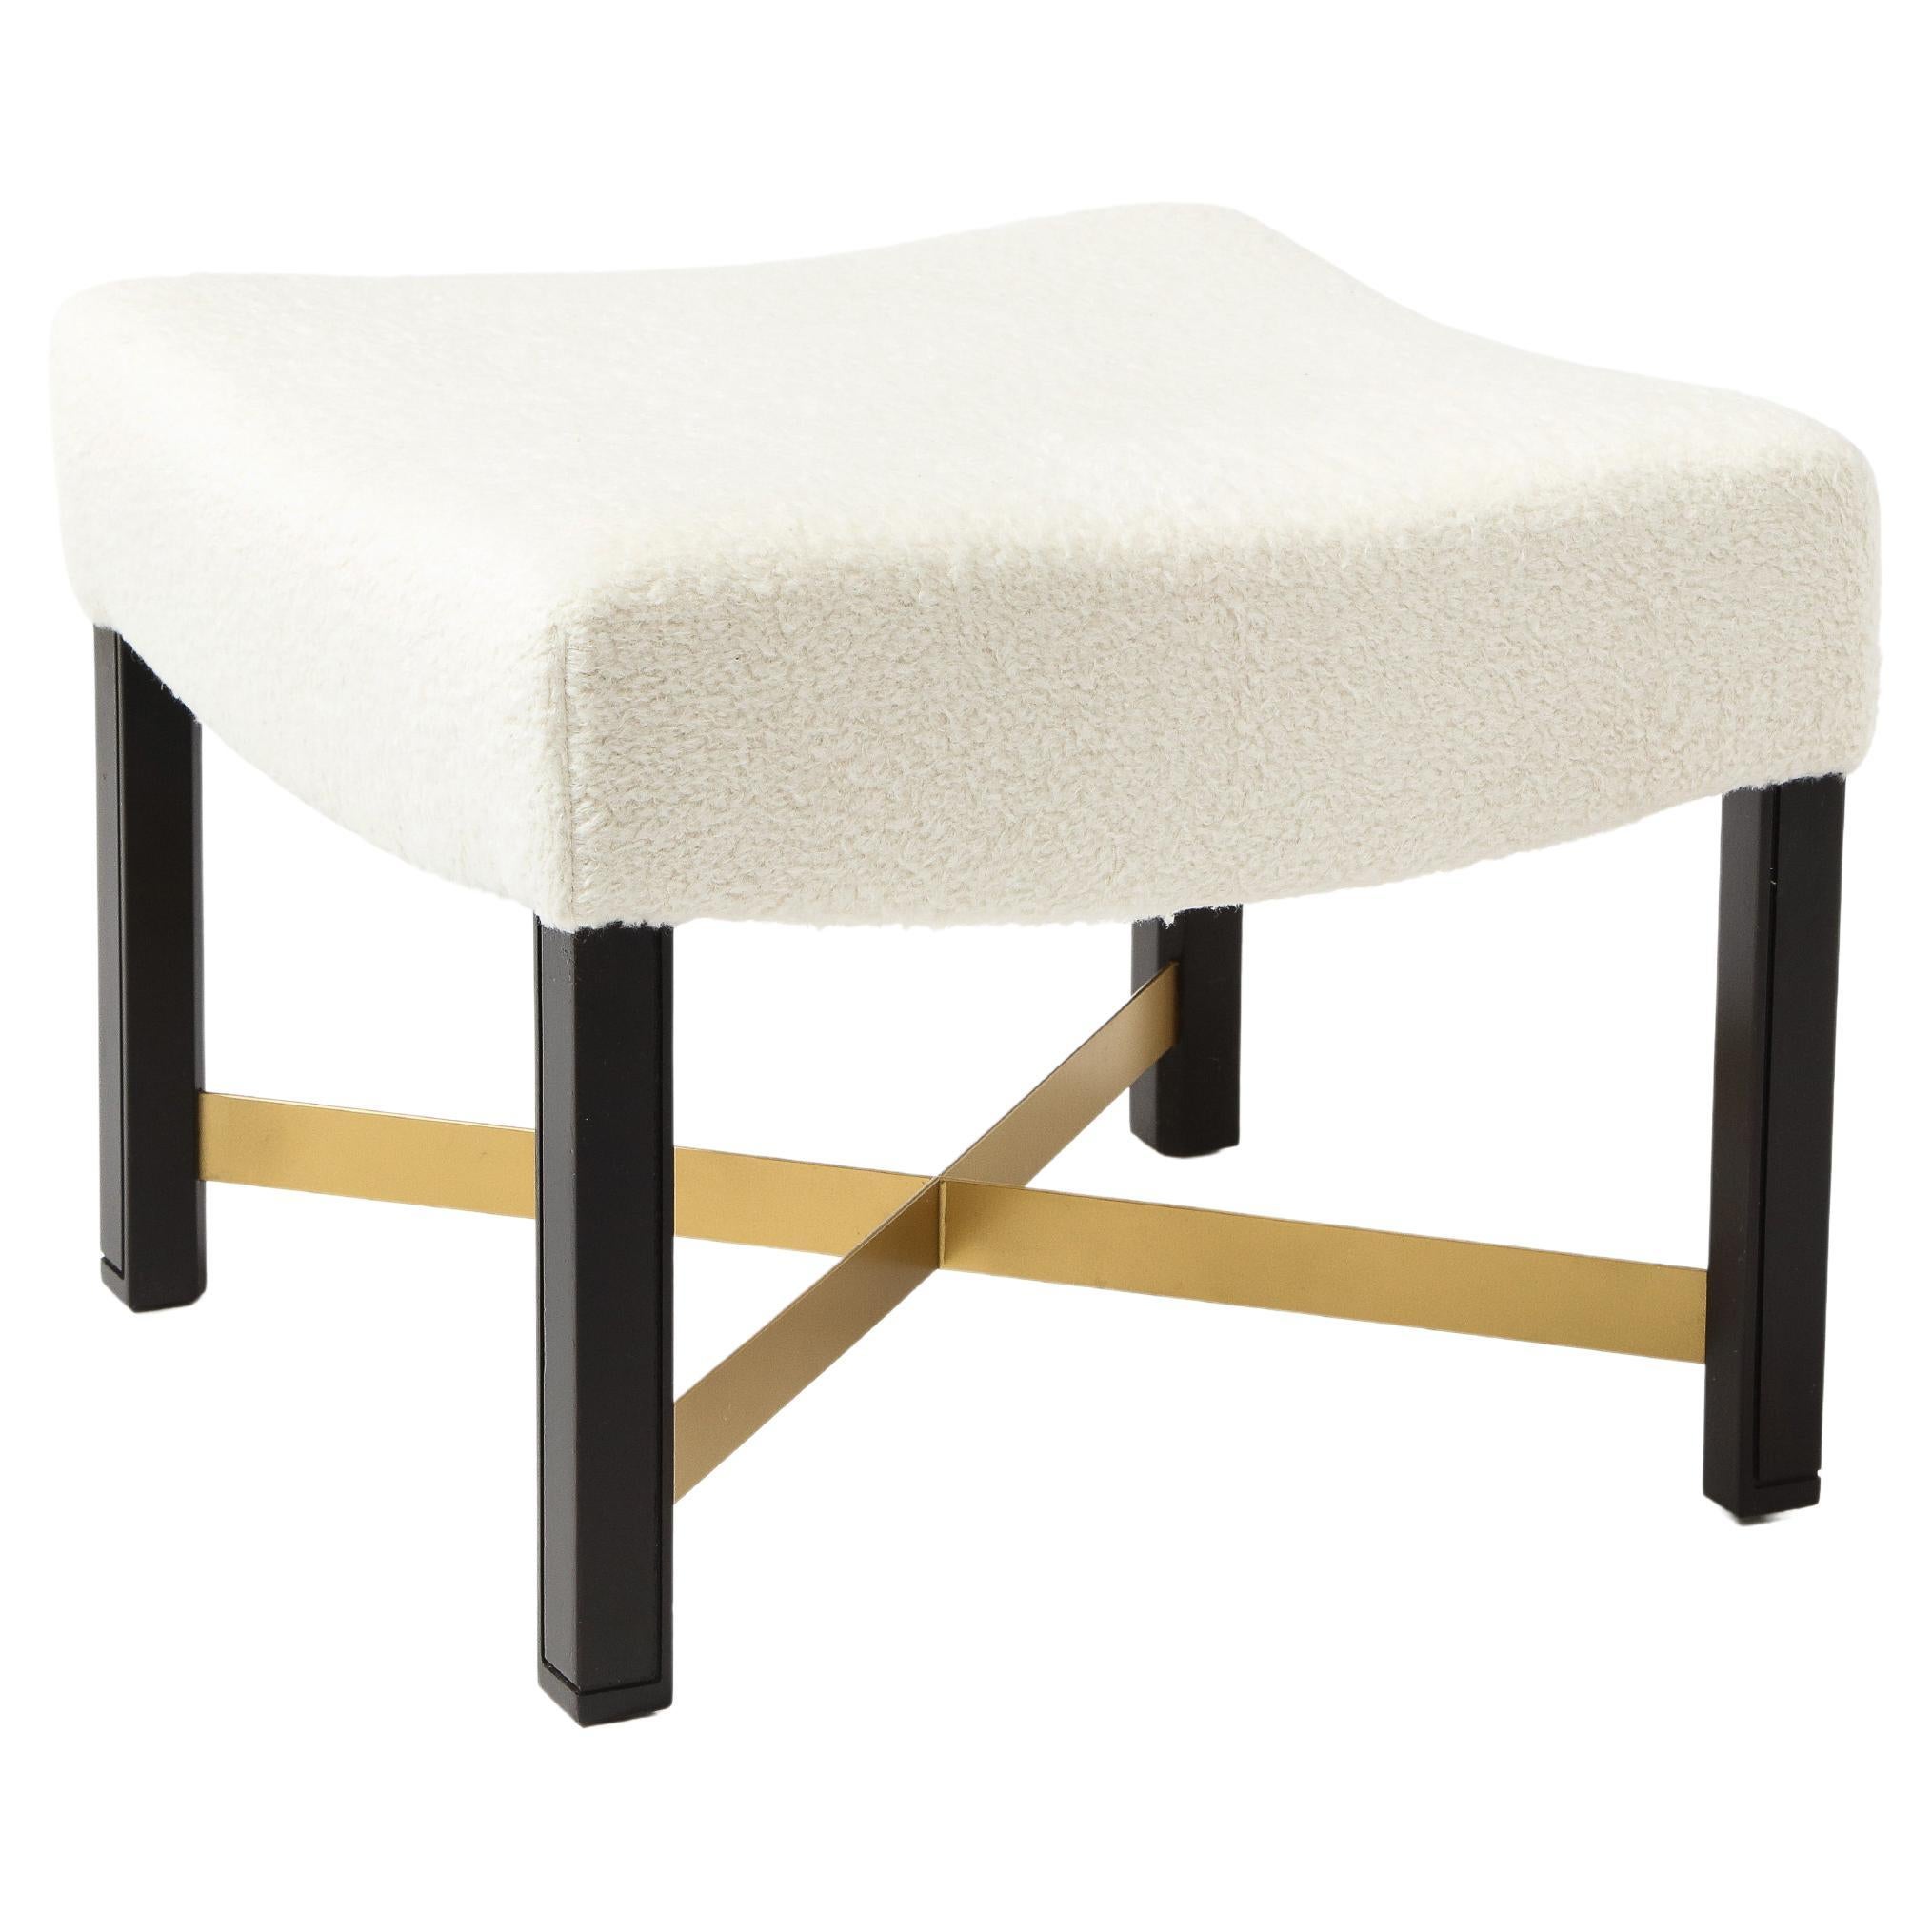 A square walnut and brass ottoman by Marden of Chicago upholstered in wool.